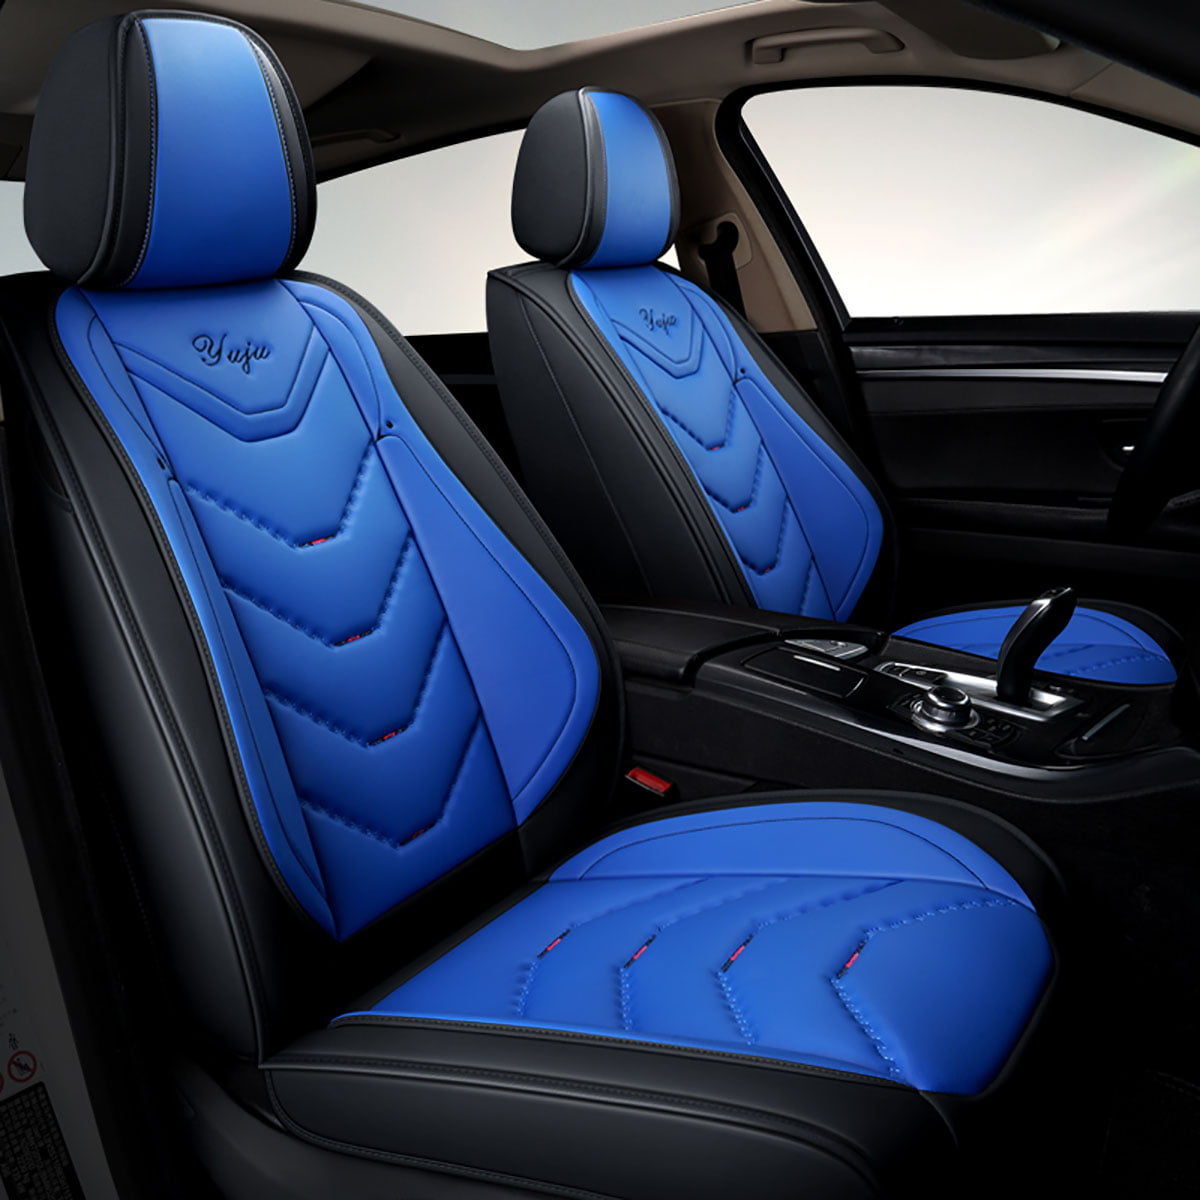 Breathable Printing Car Seat Protectors with Steering Wheel Cover and Shoulder Pads Automobiles Car Interior Accessories Blue Yous Auto Car Seat Covers for Front and Rear